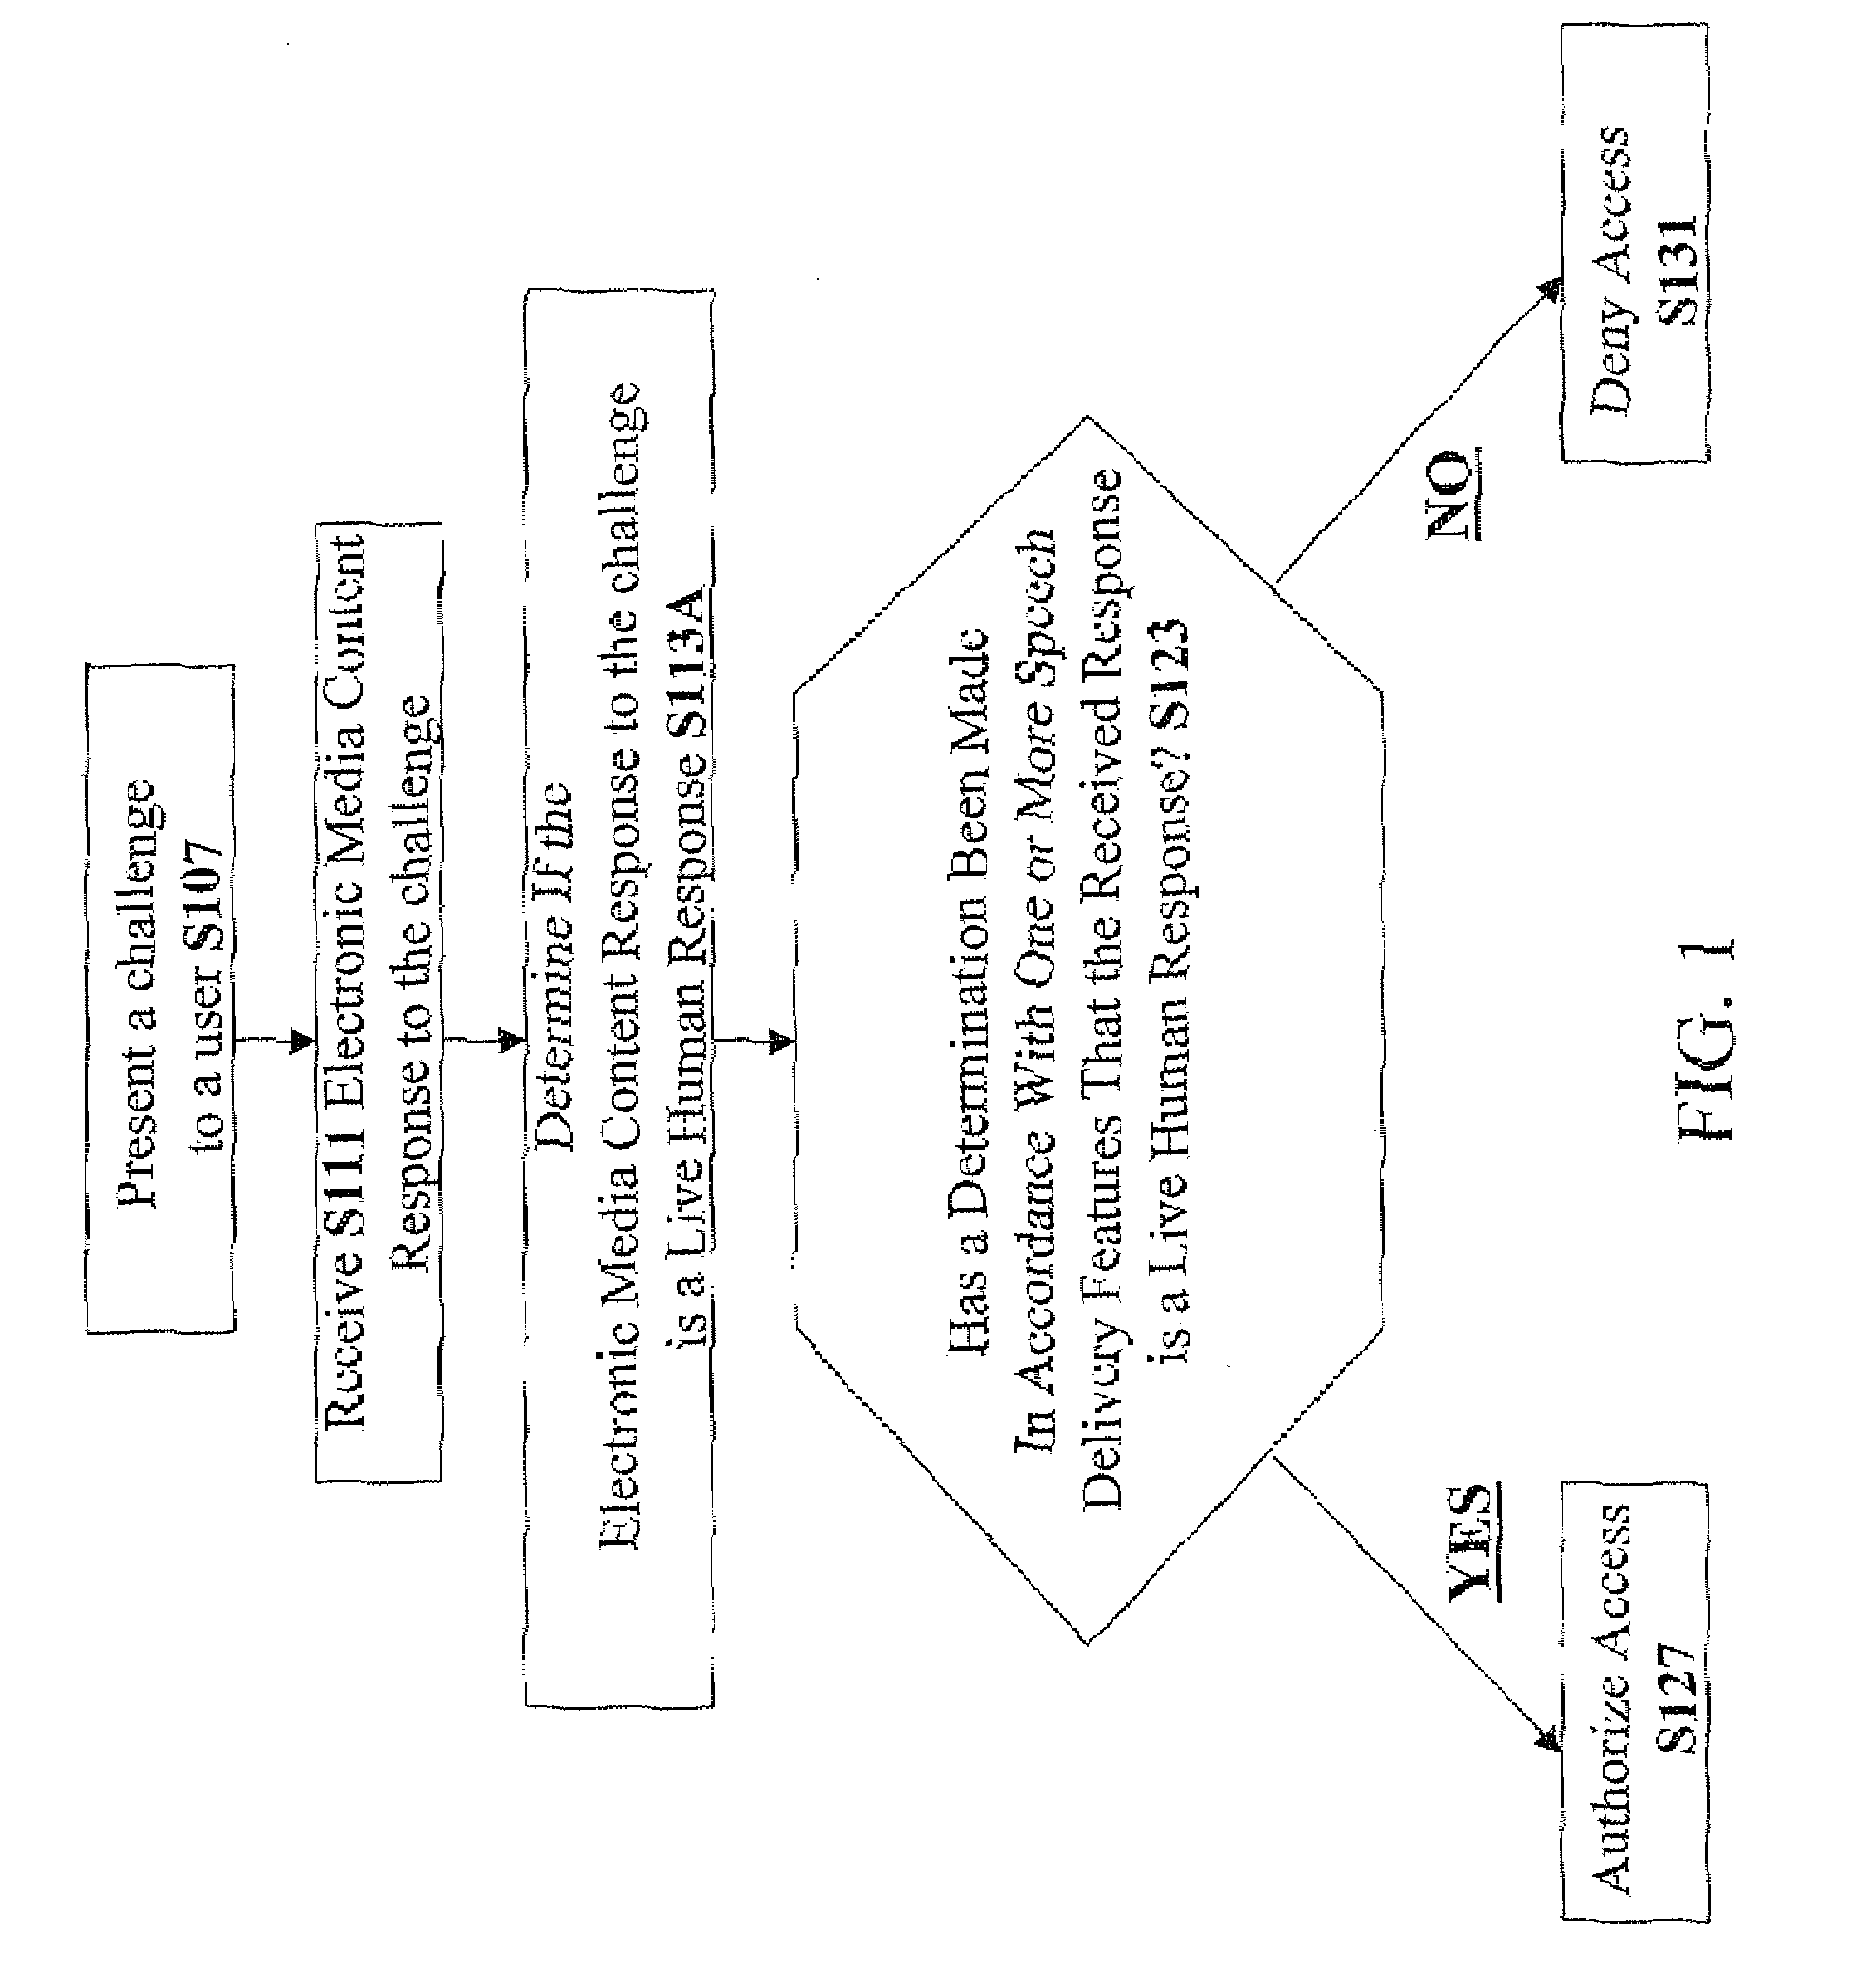 Method, apparatus and computer code for selectively providing access to a service in accordance with spoken content received from a user